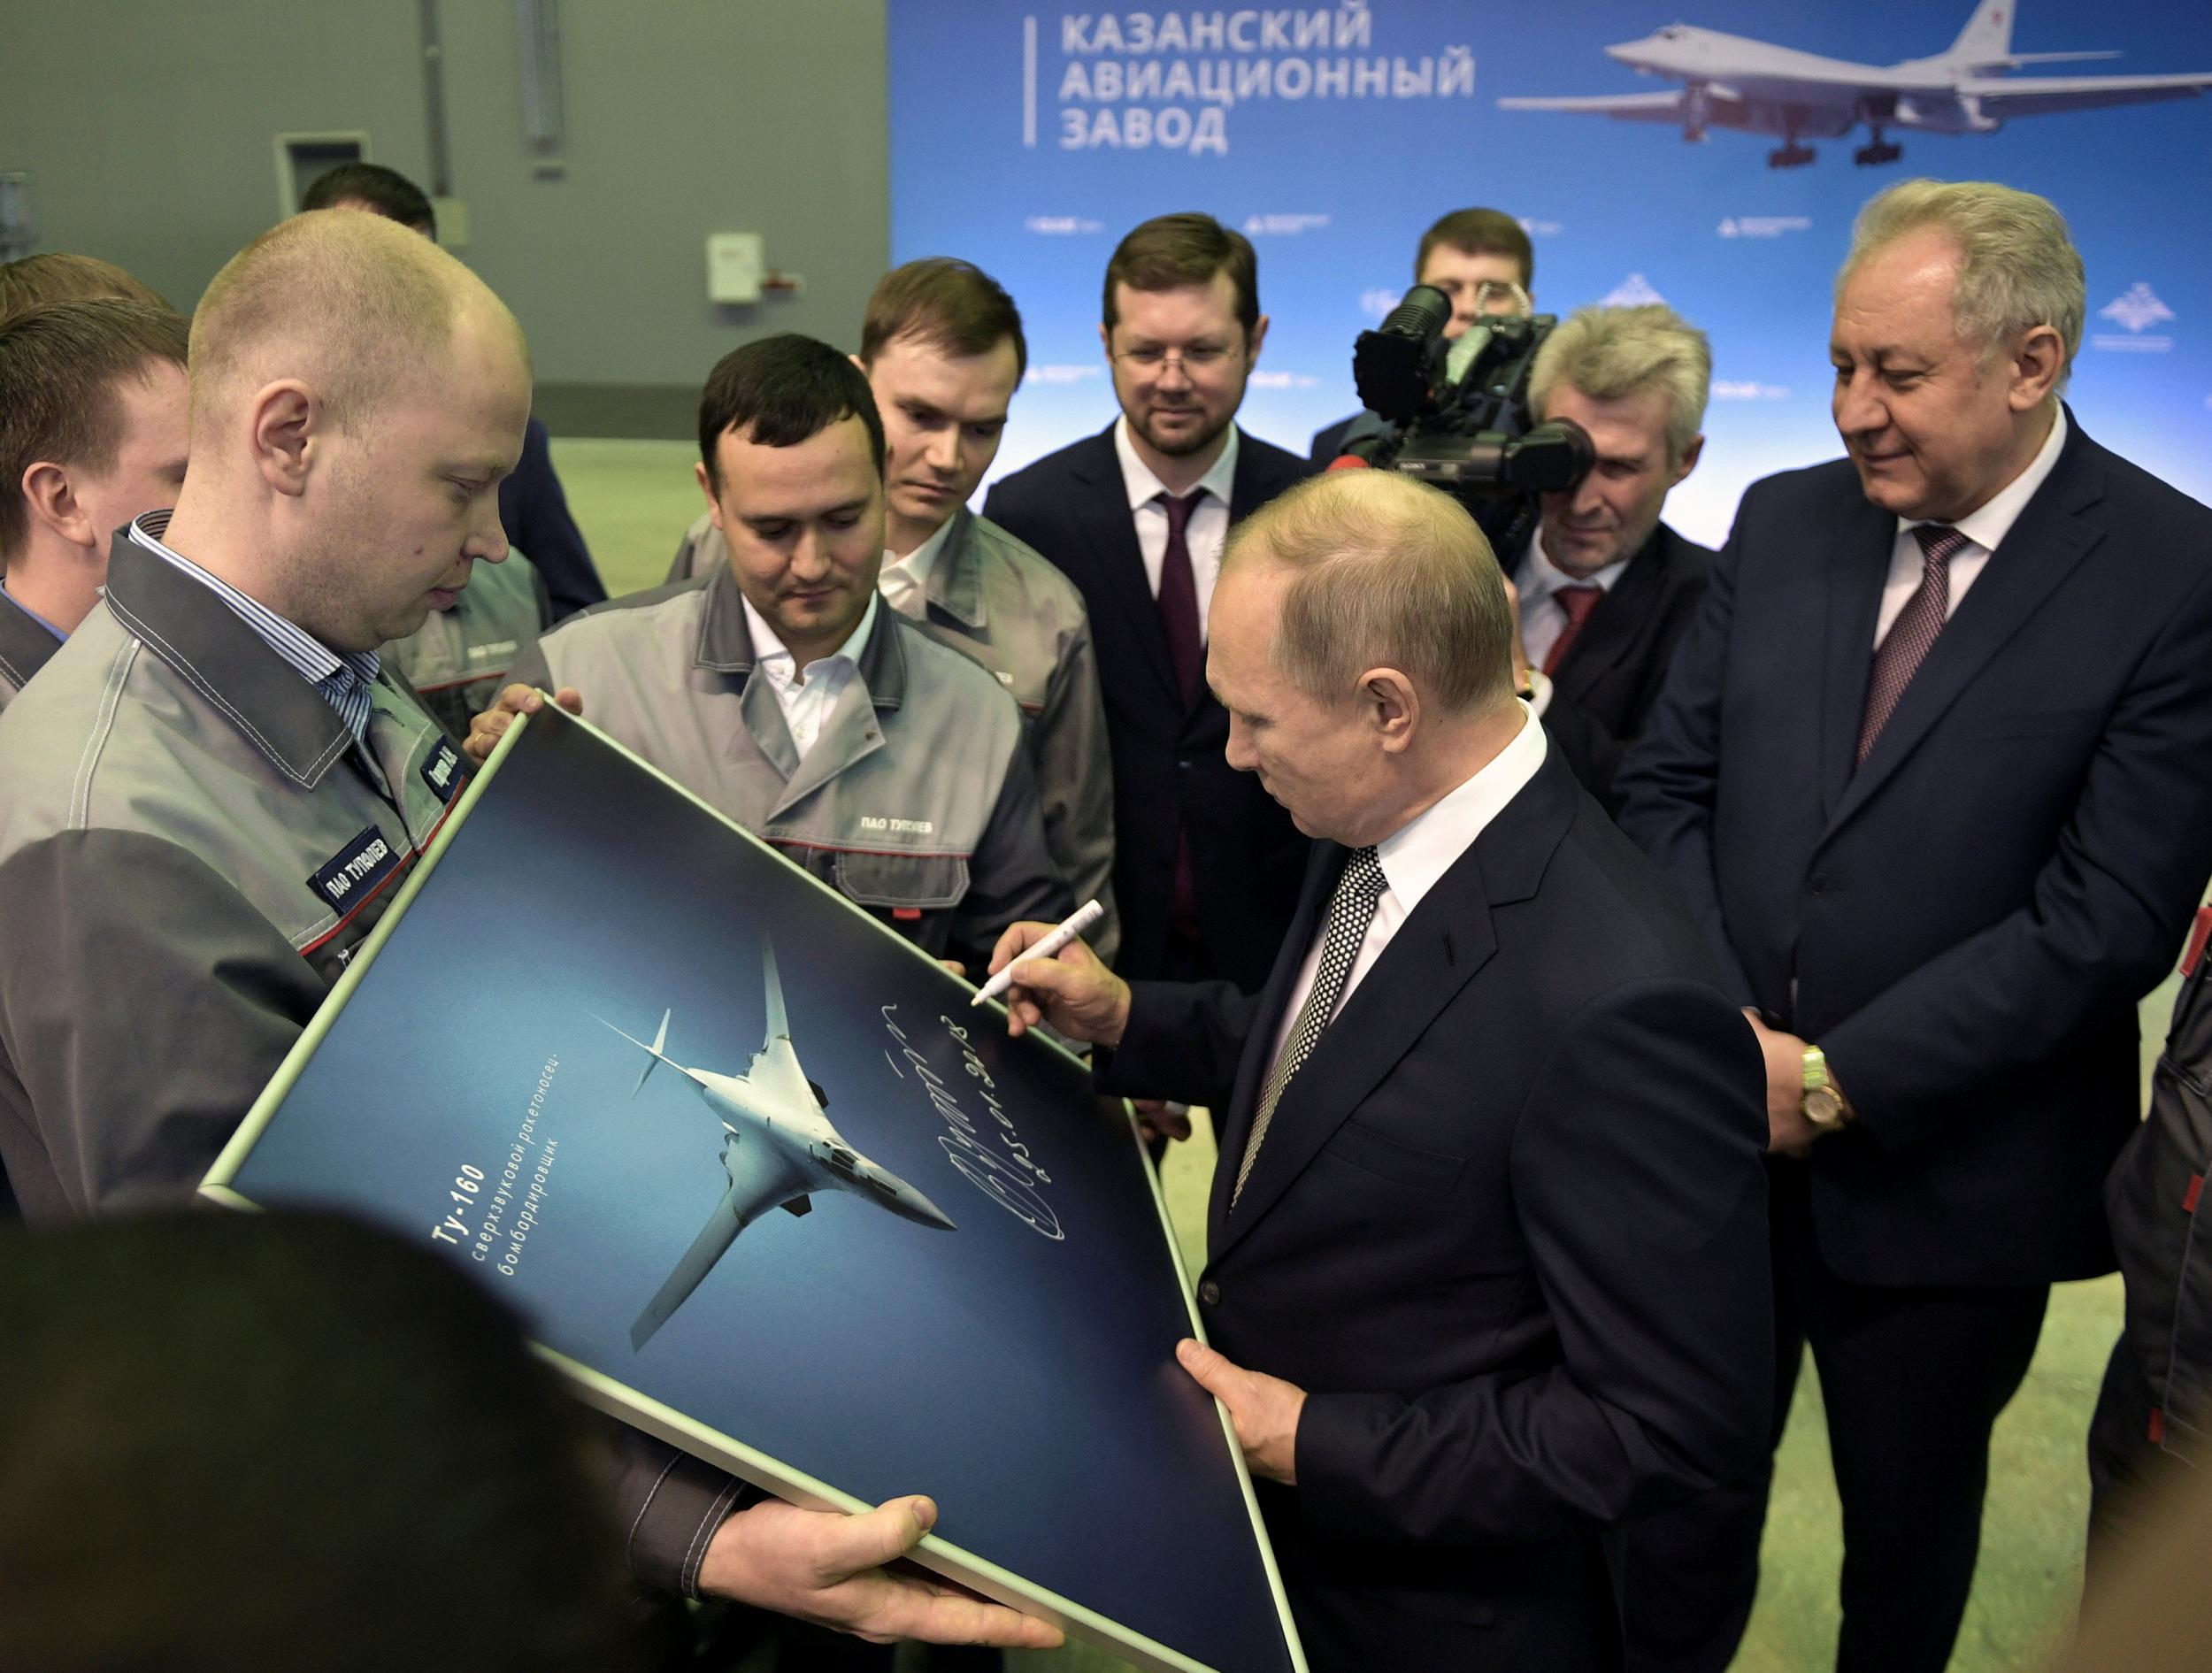 Vladimir Putin signs a picture of a TU-160M nuclear bomber